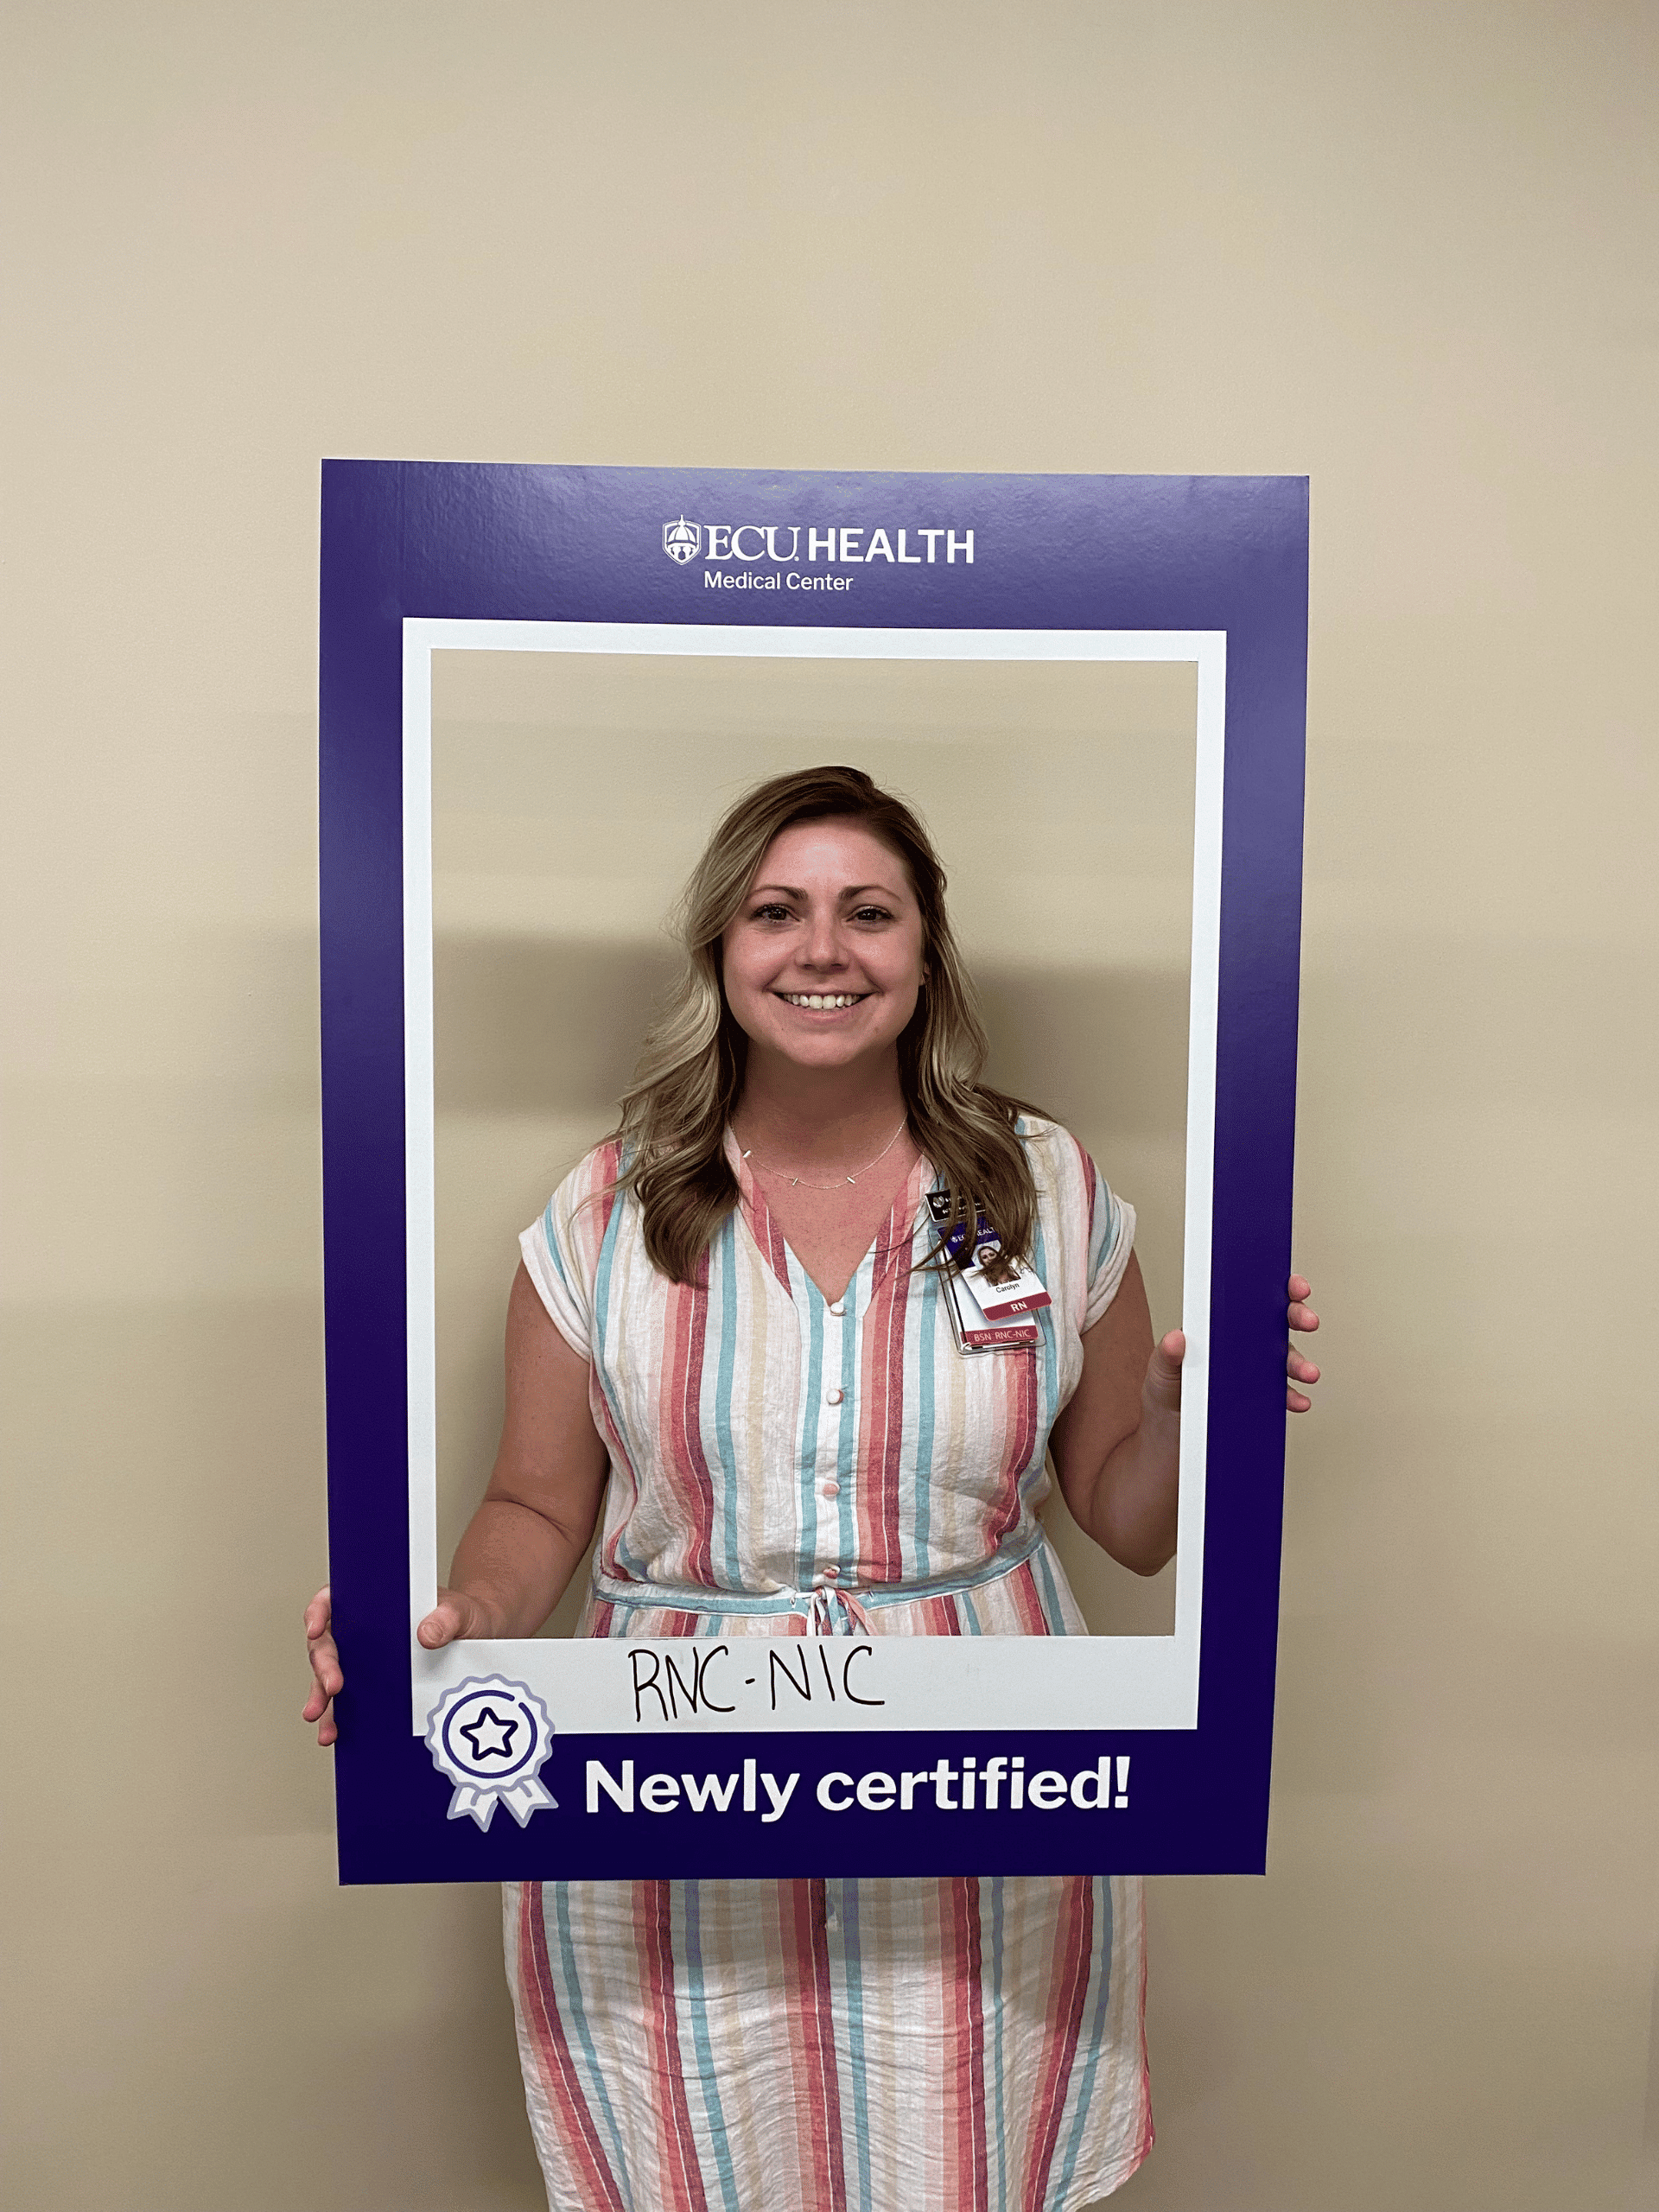 Carolyn Koonce, BSN, RN, RNC-NIC, is a Neonatal Outreach Coordinator and she just recently received her RNC-NIC, Neonatal Intensive Care Nursing certification.